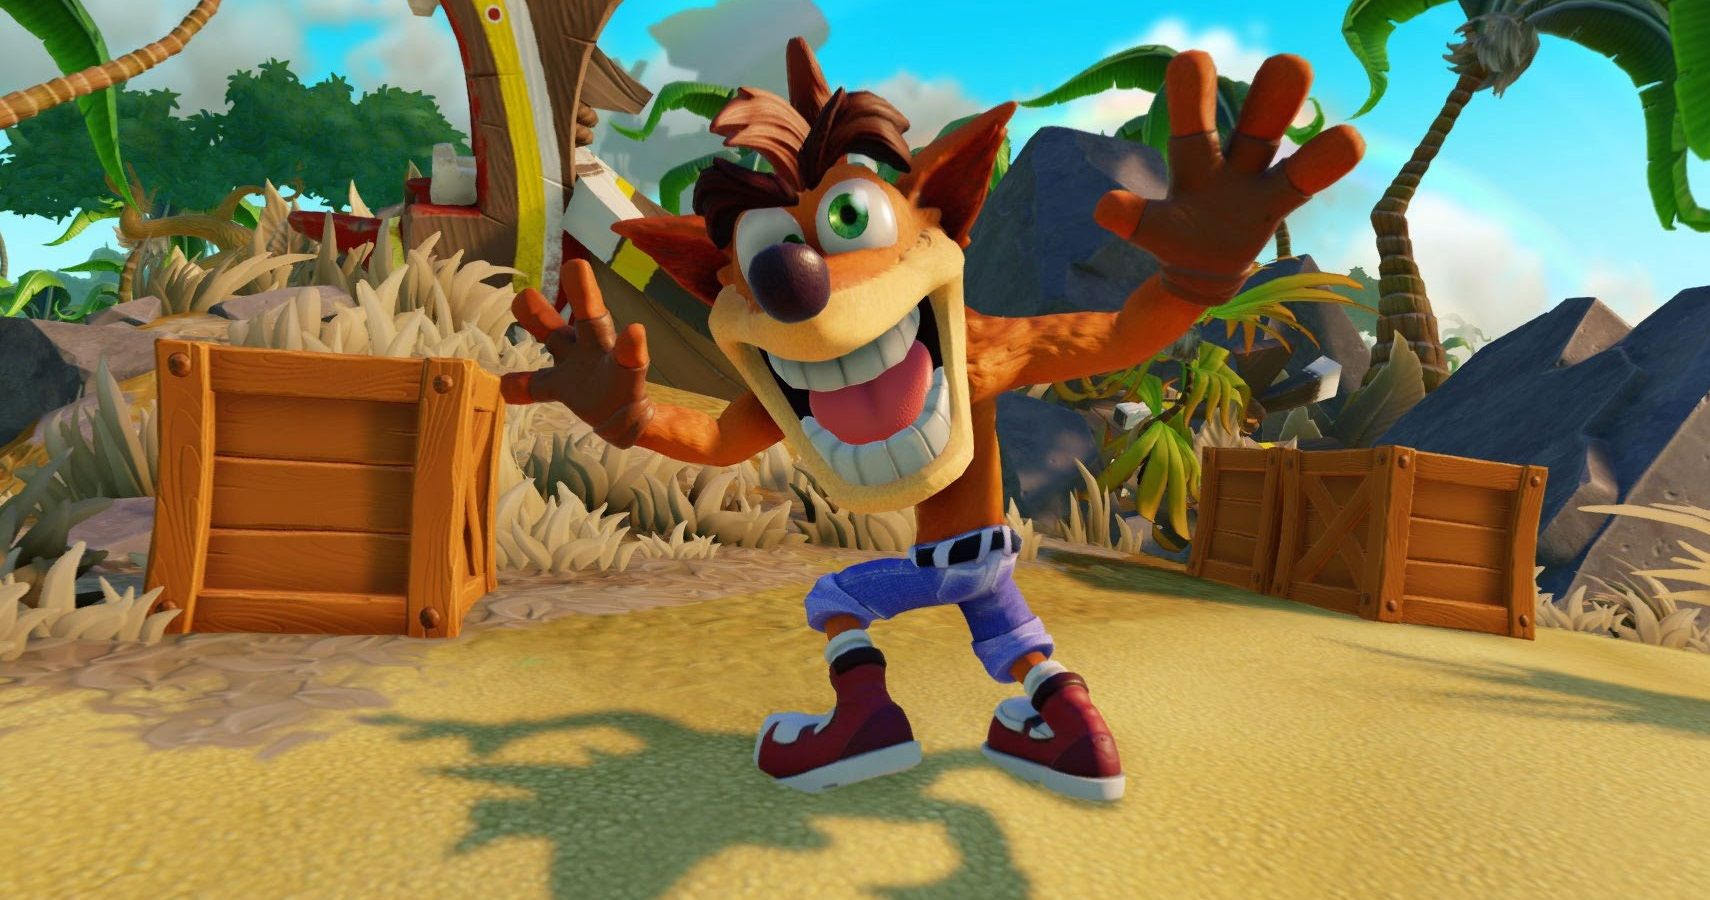 A New Crash Bandicoot Game Is Coming But It Isnt The Sequel Wed Hoped For